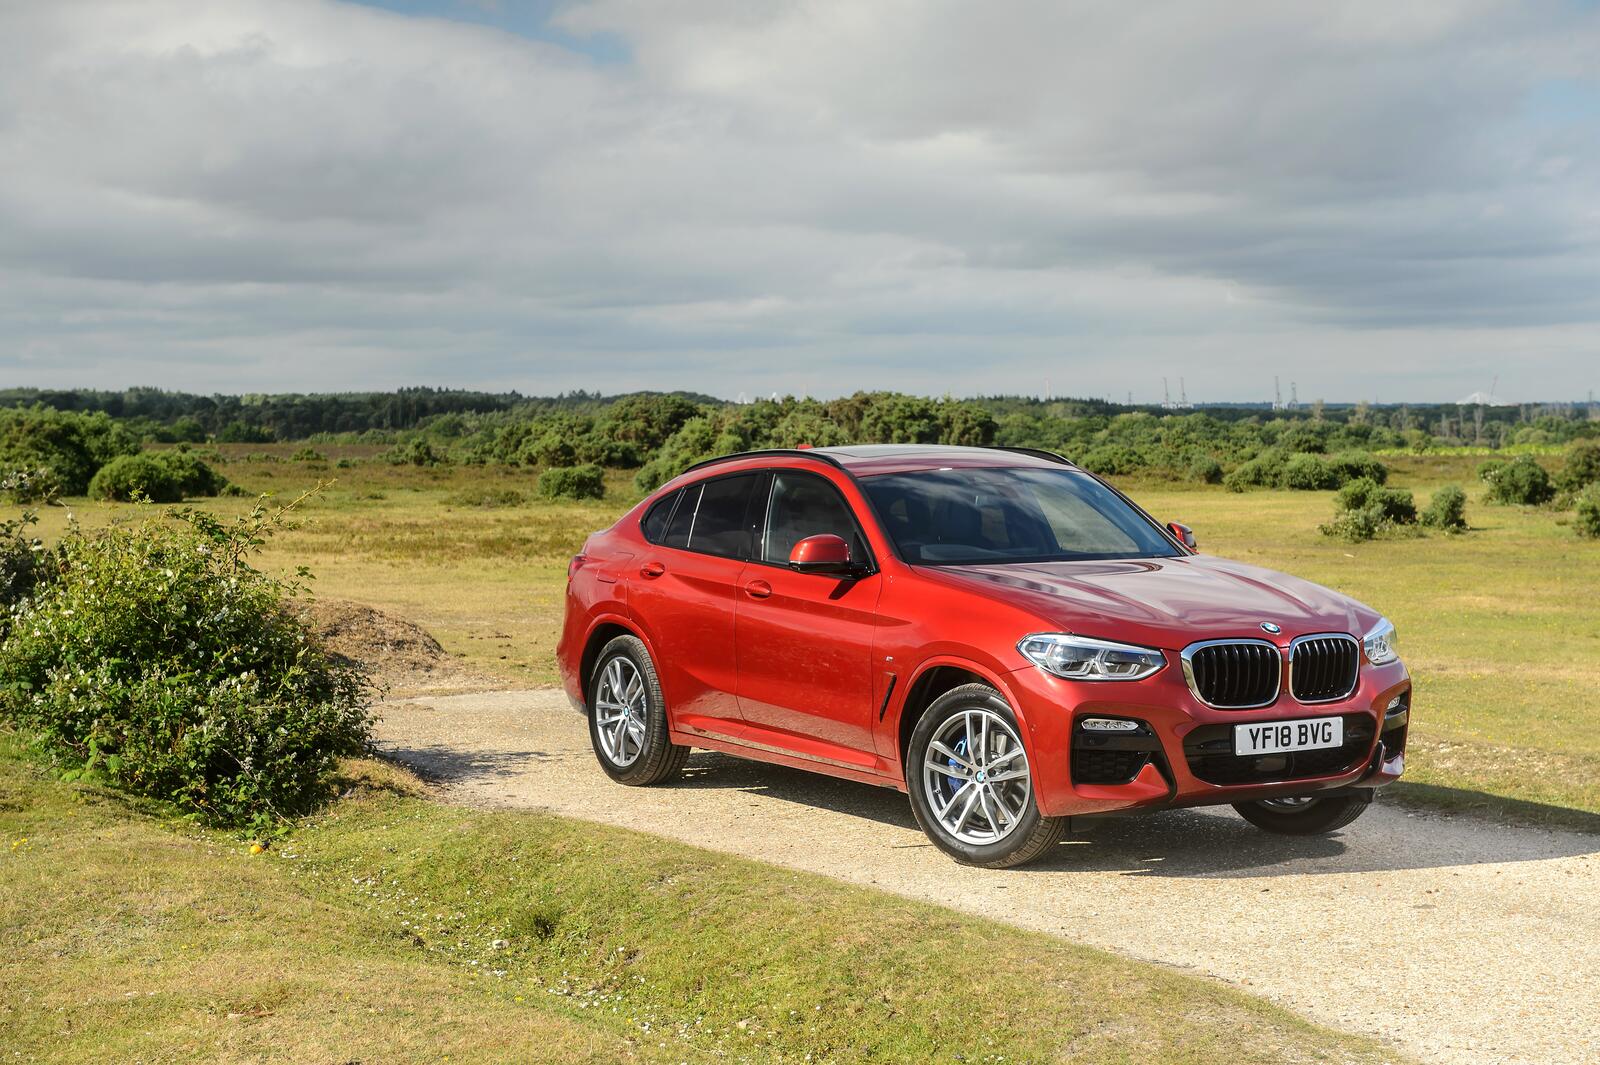 Wallpapers wallpaper bmw x4 luxury cars Jeep on the desktop